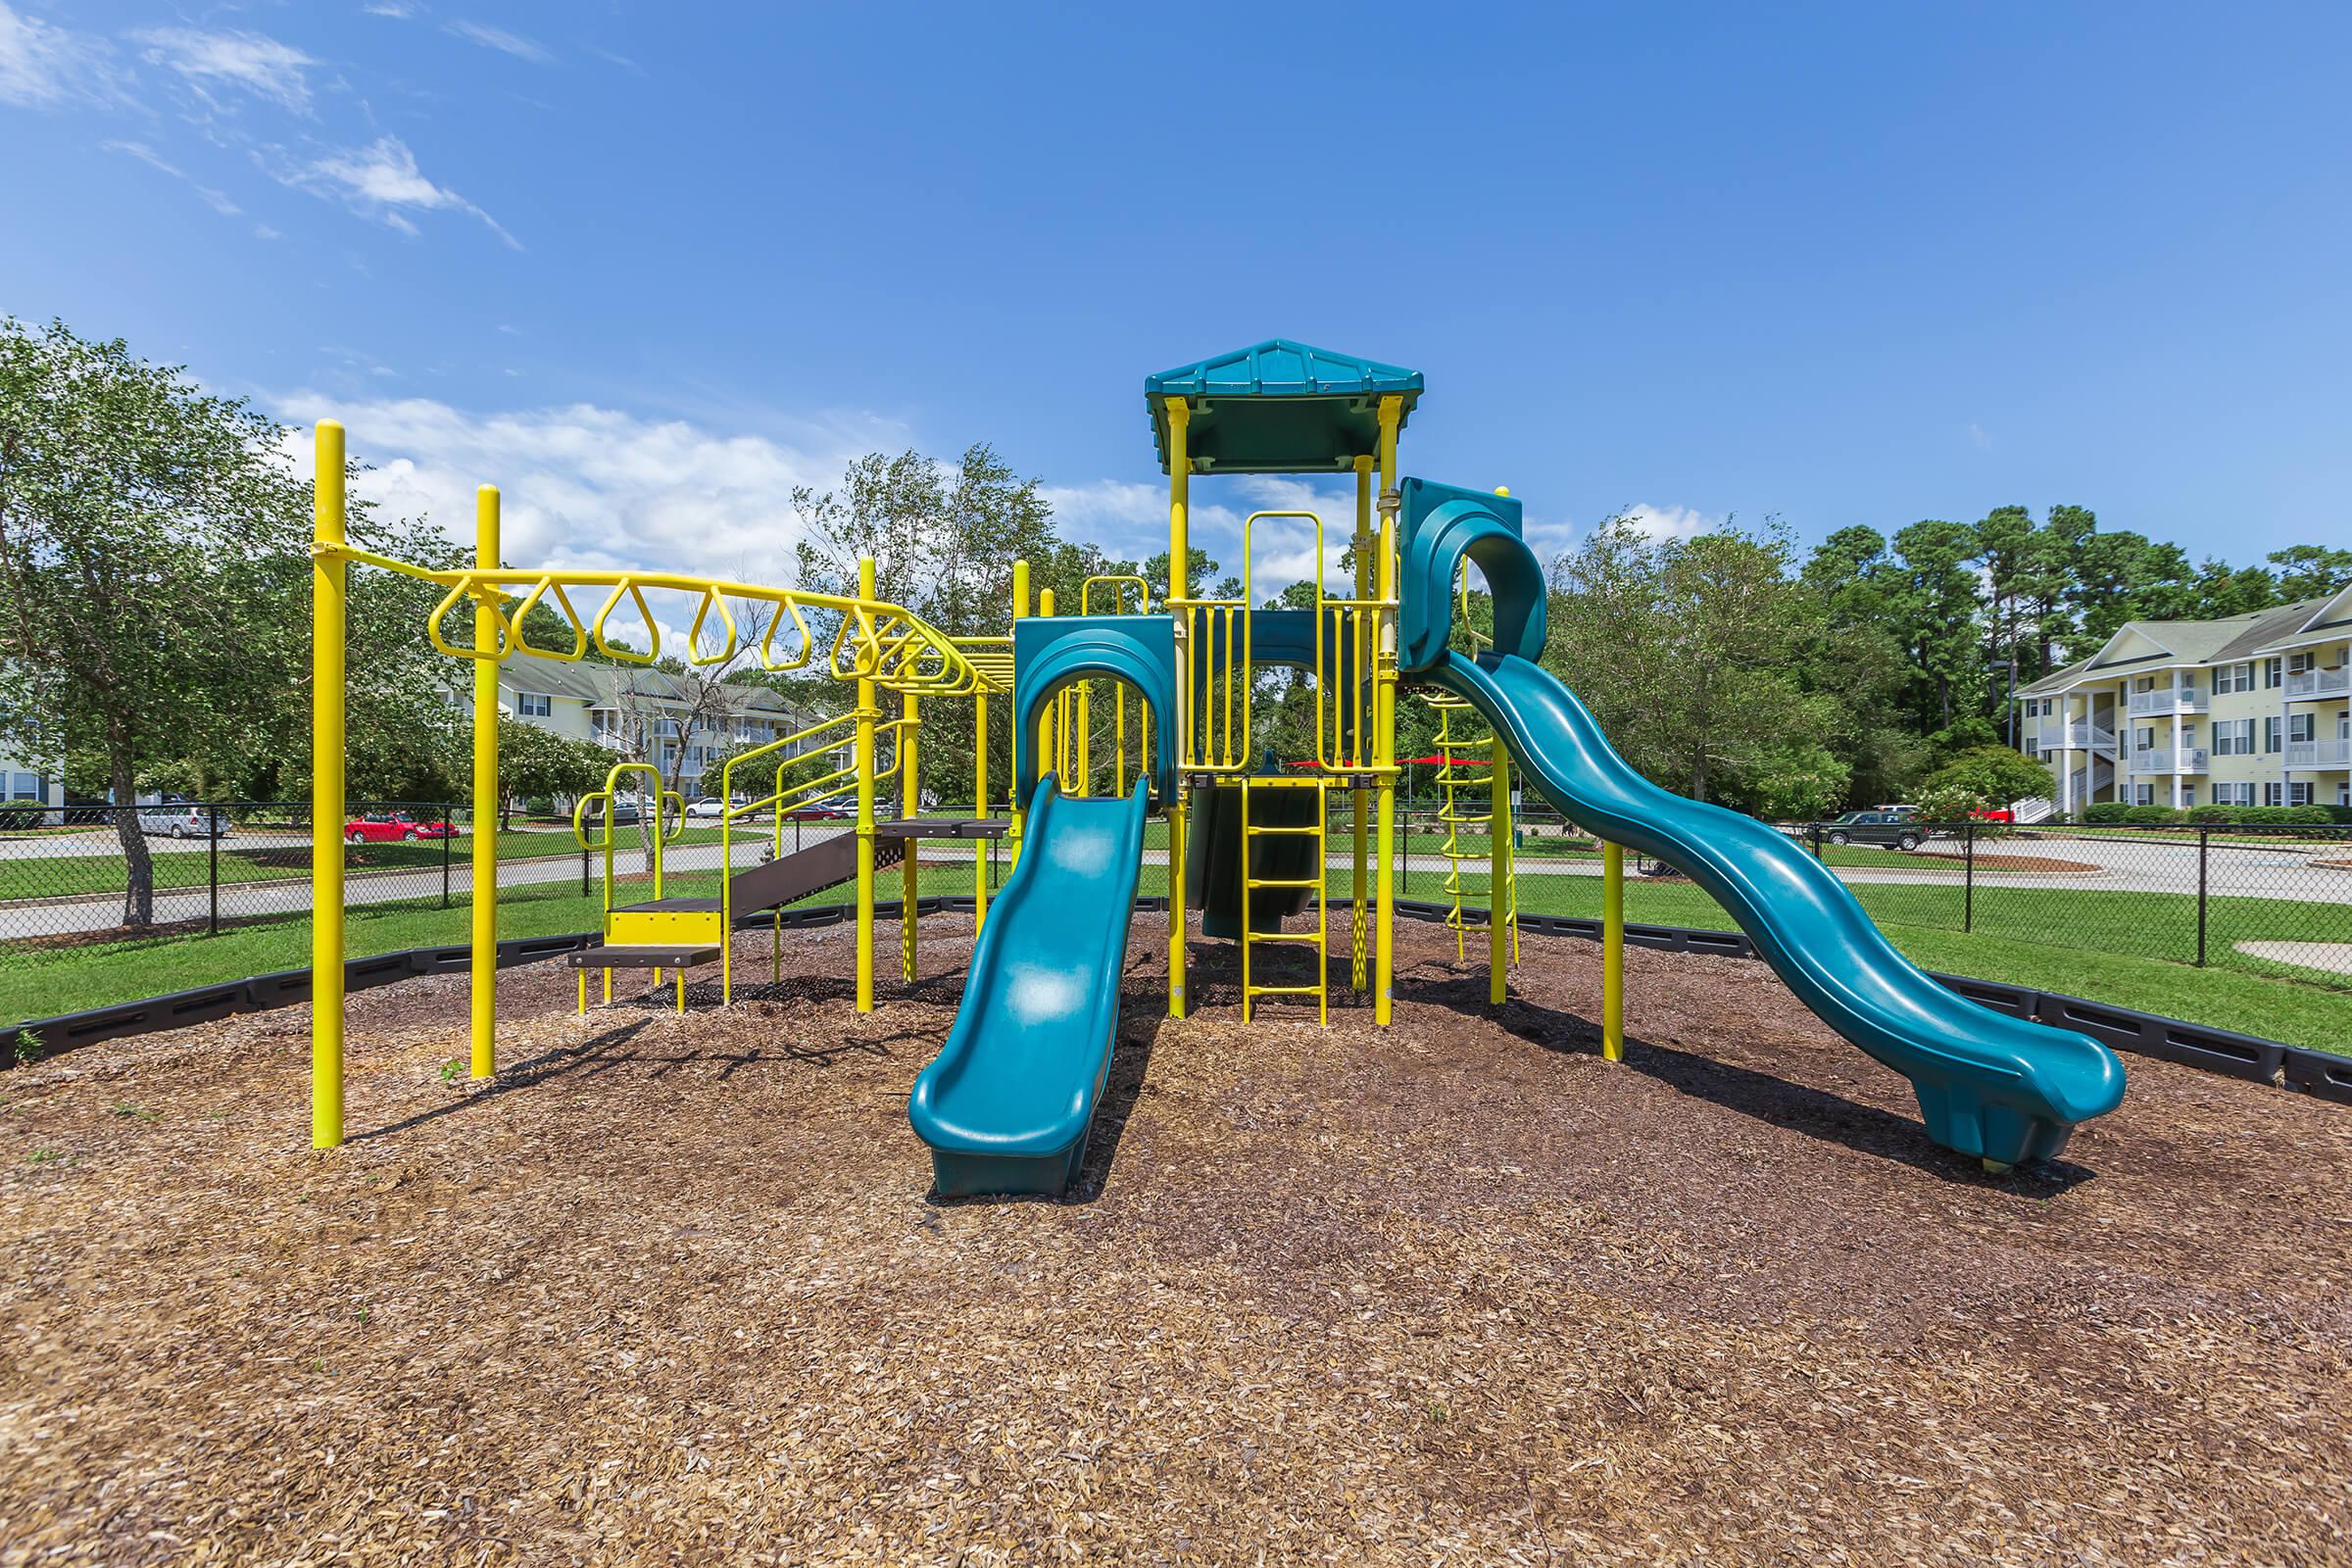 Have fun on the playground at Tesla Park in Wilmington, North Carolina.